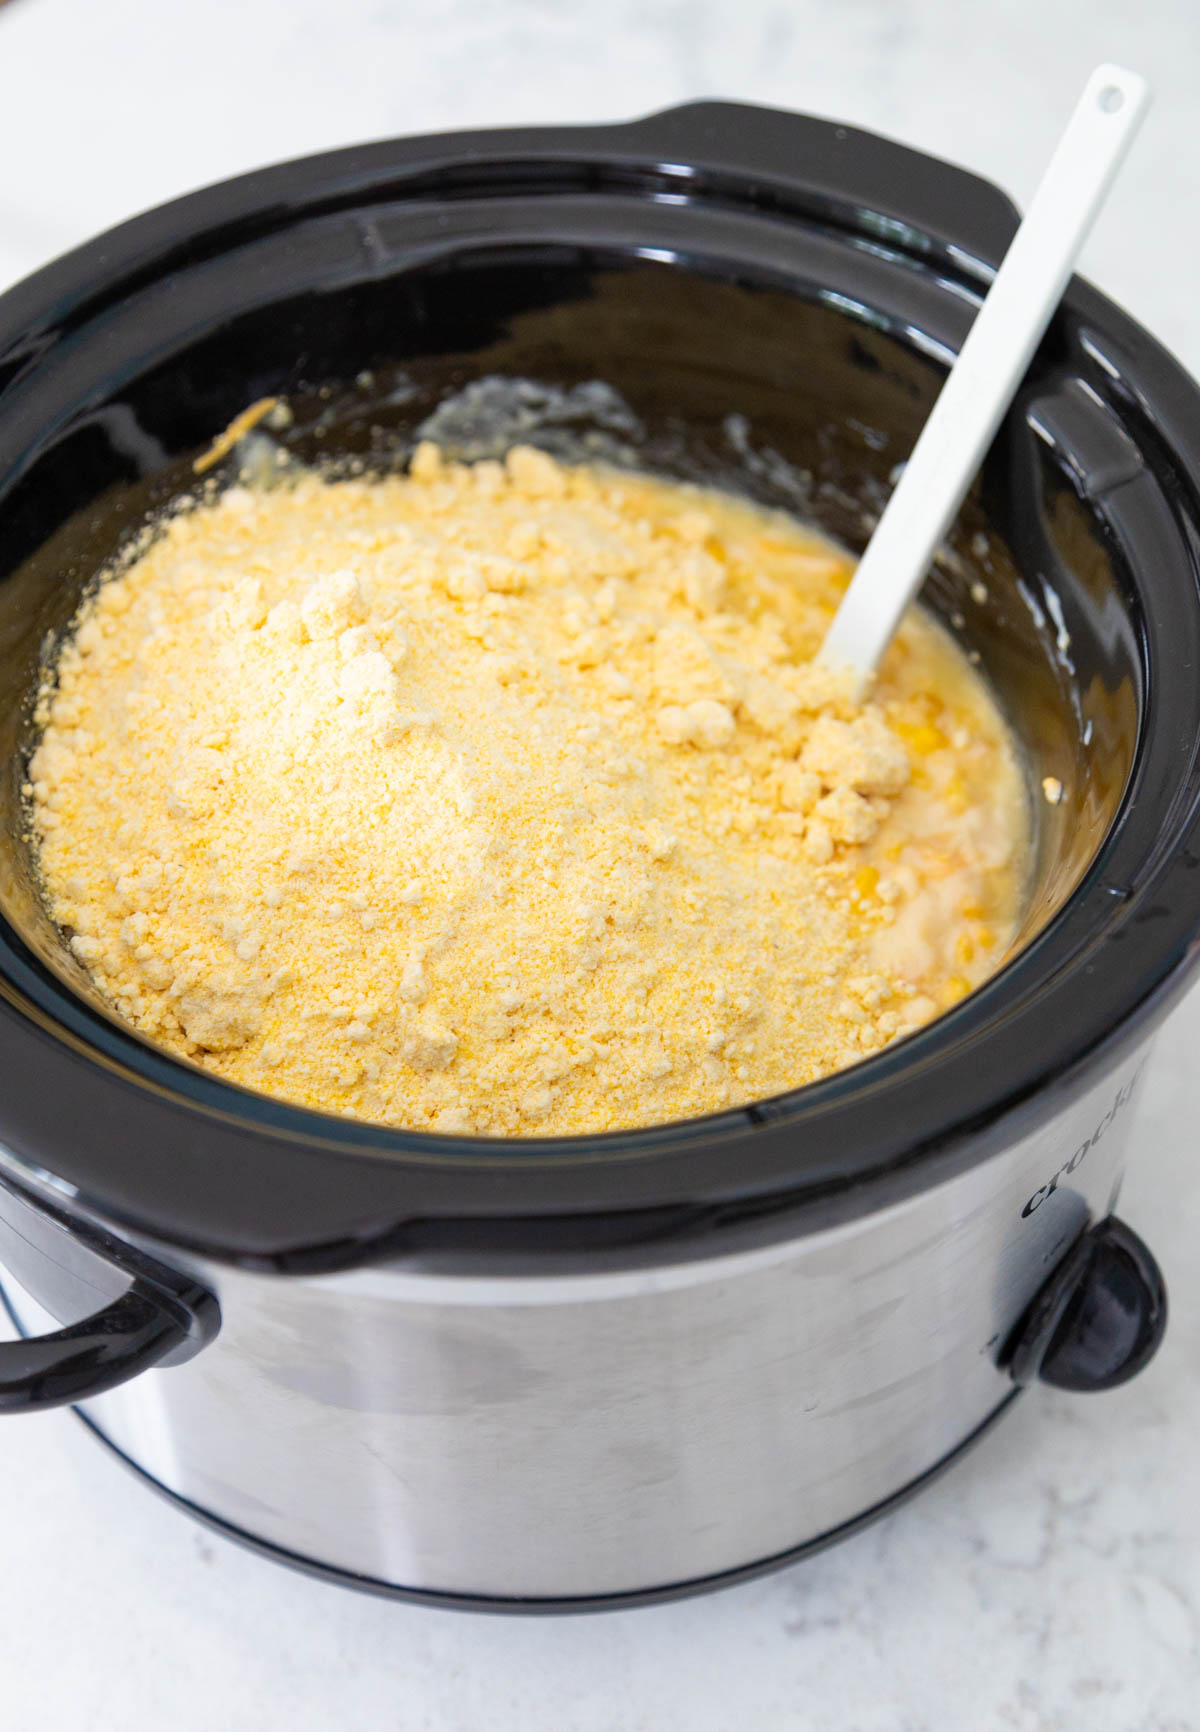 The dry cornbread mix has been added to the slowcooker.